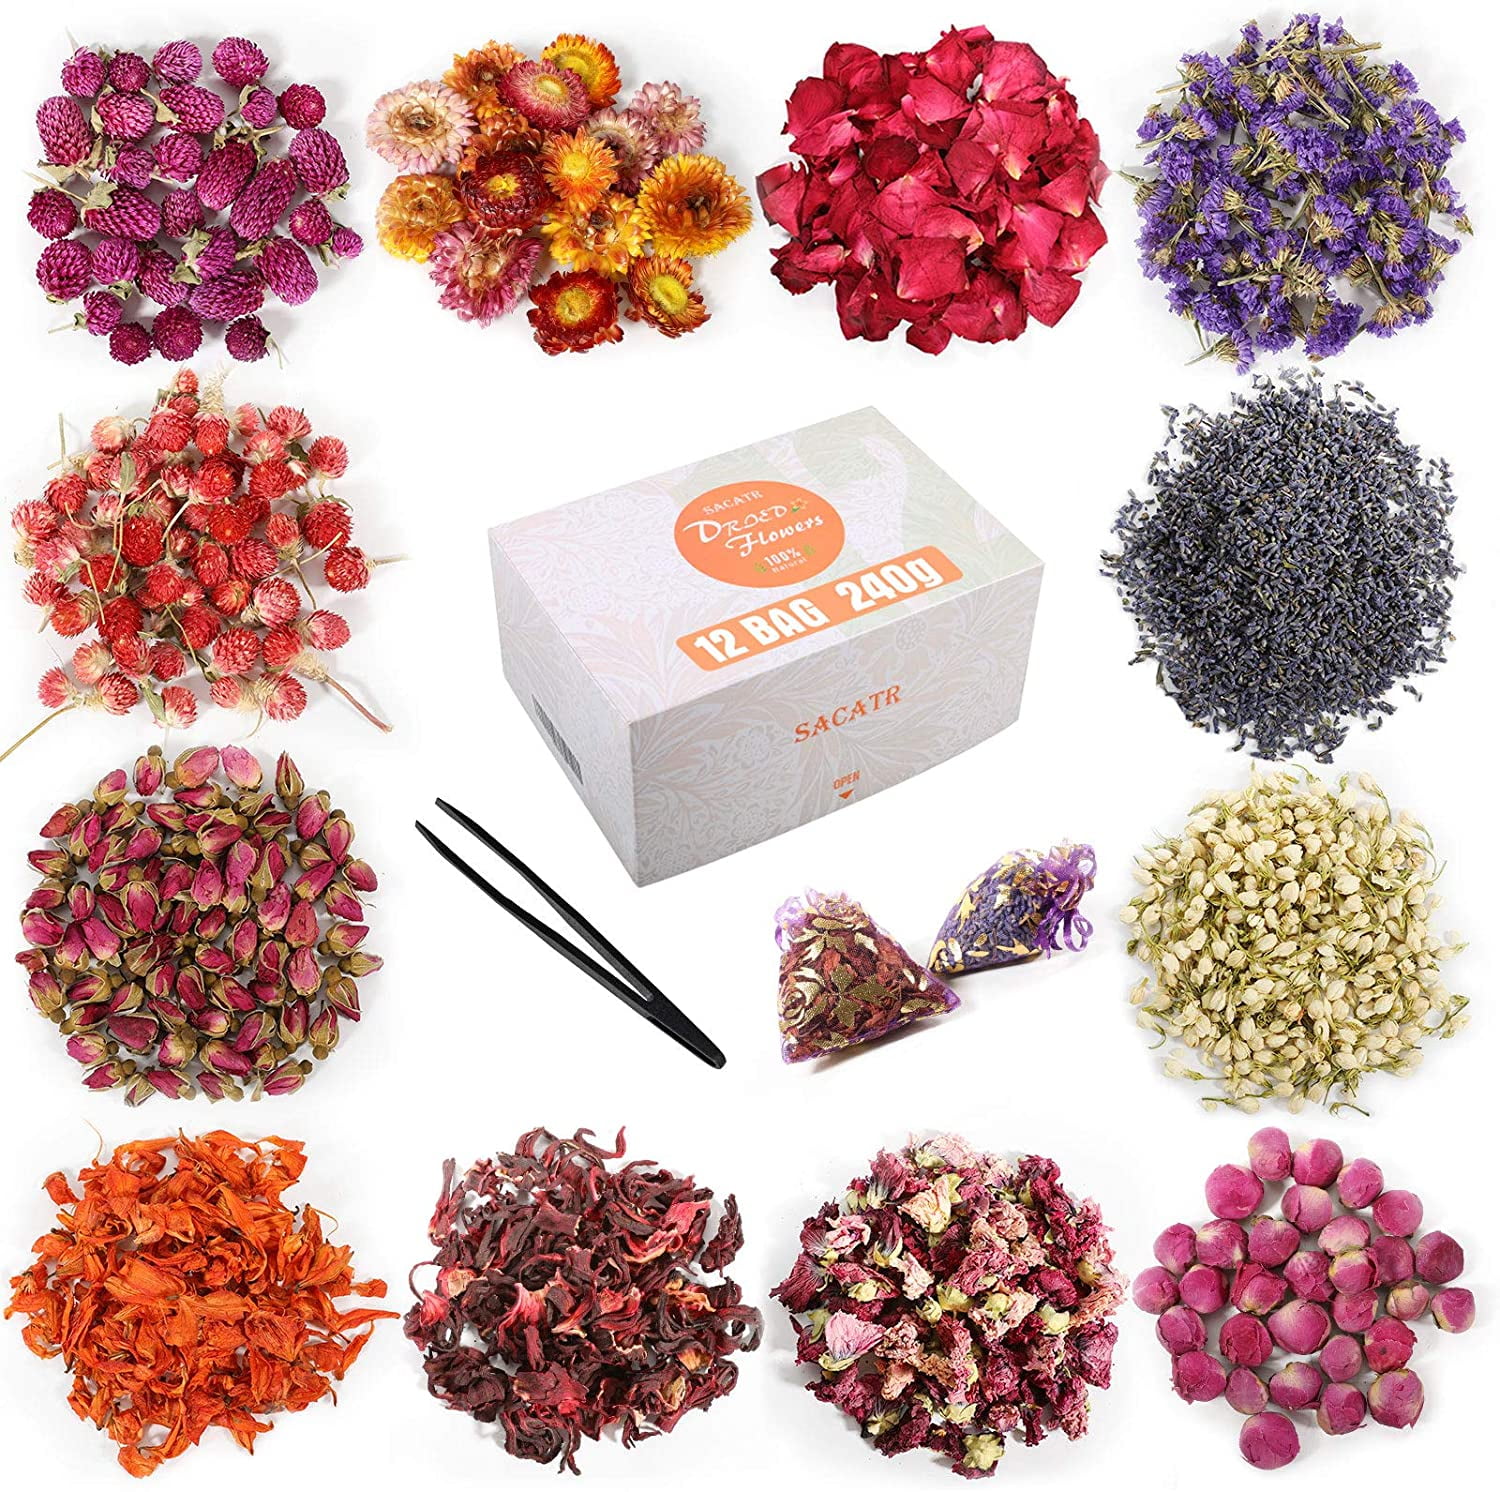 Dried Flowers, 21 Bags 100% Natural Dried Flowers Herbs Kit for Soap M –  WoodArtSupply